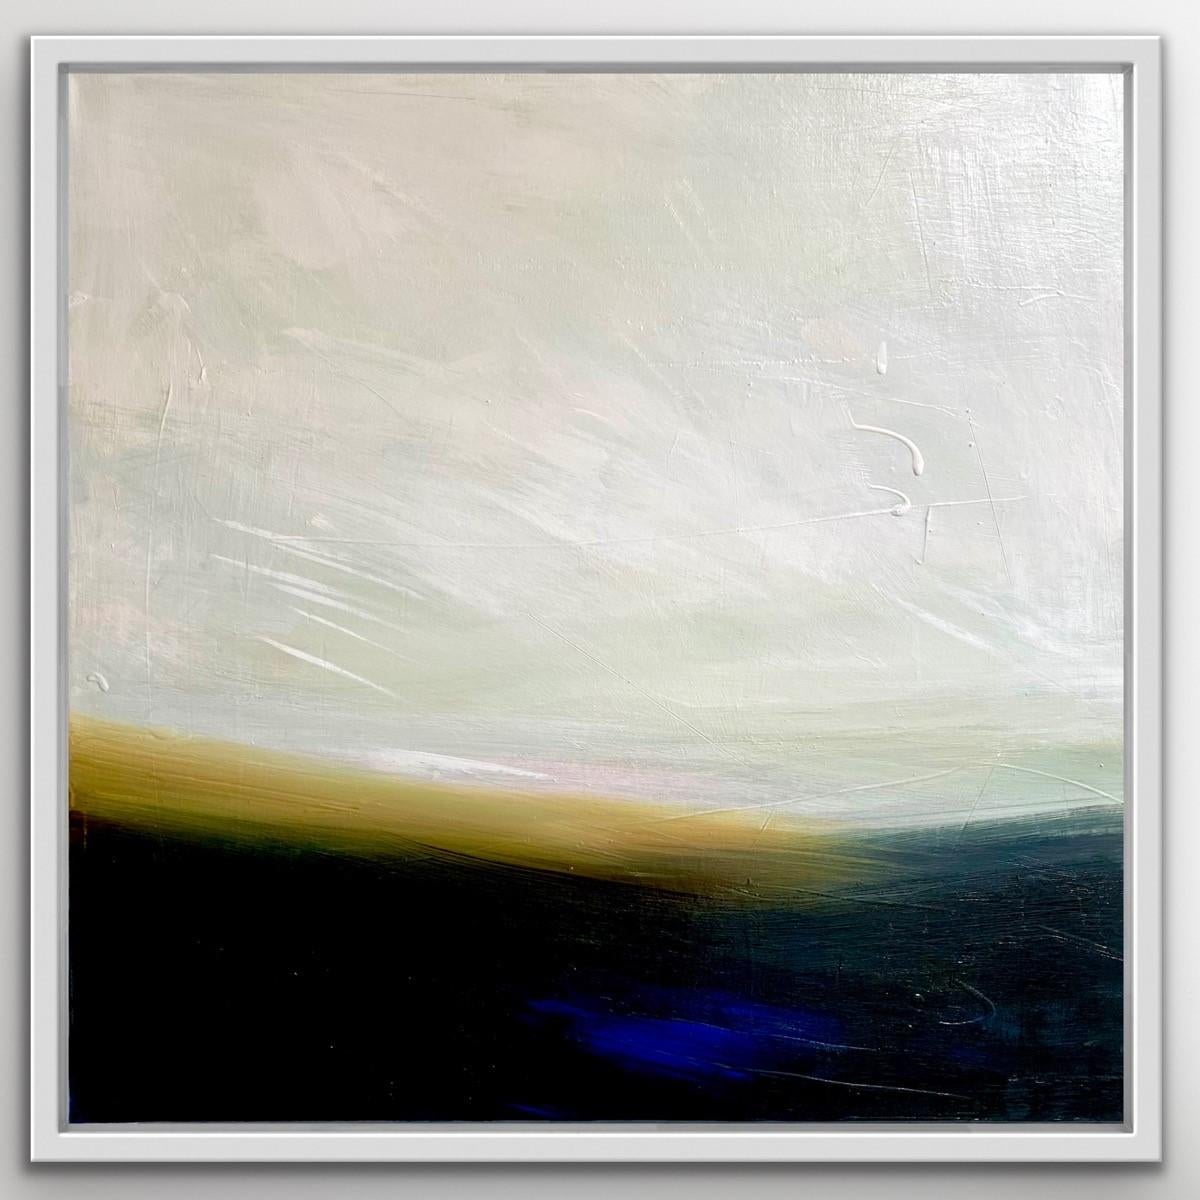 Slow Drift by Clare Millen [2021]

original
Acrylic on canvas
Image size: H:60 cm x W:60 cm
Complete Size of Unframed Work: H:60 cm x W:60 cm x D:1.5cm
Sold Unframed
Please note that insitu images are purely an indication of how a piece may look

A